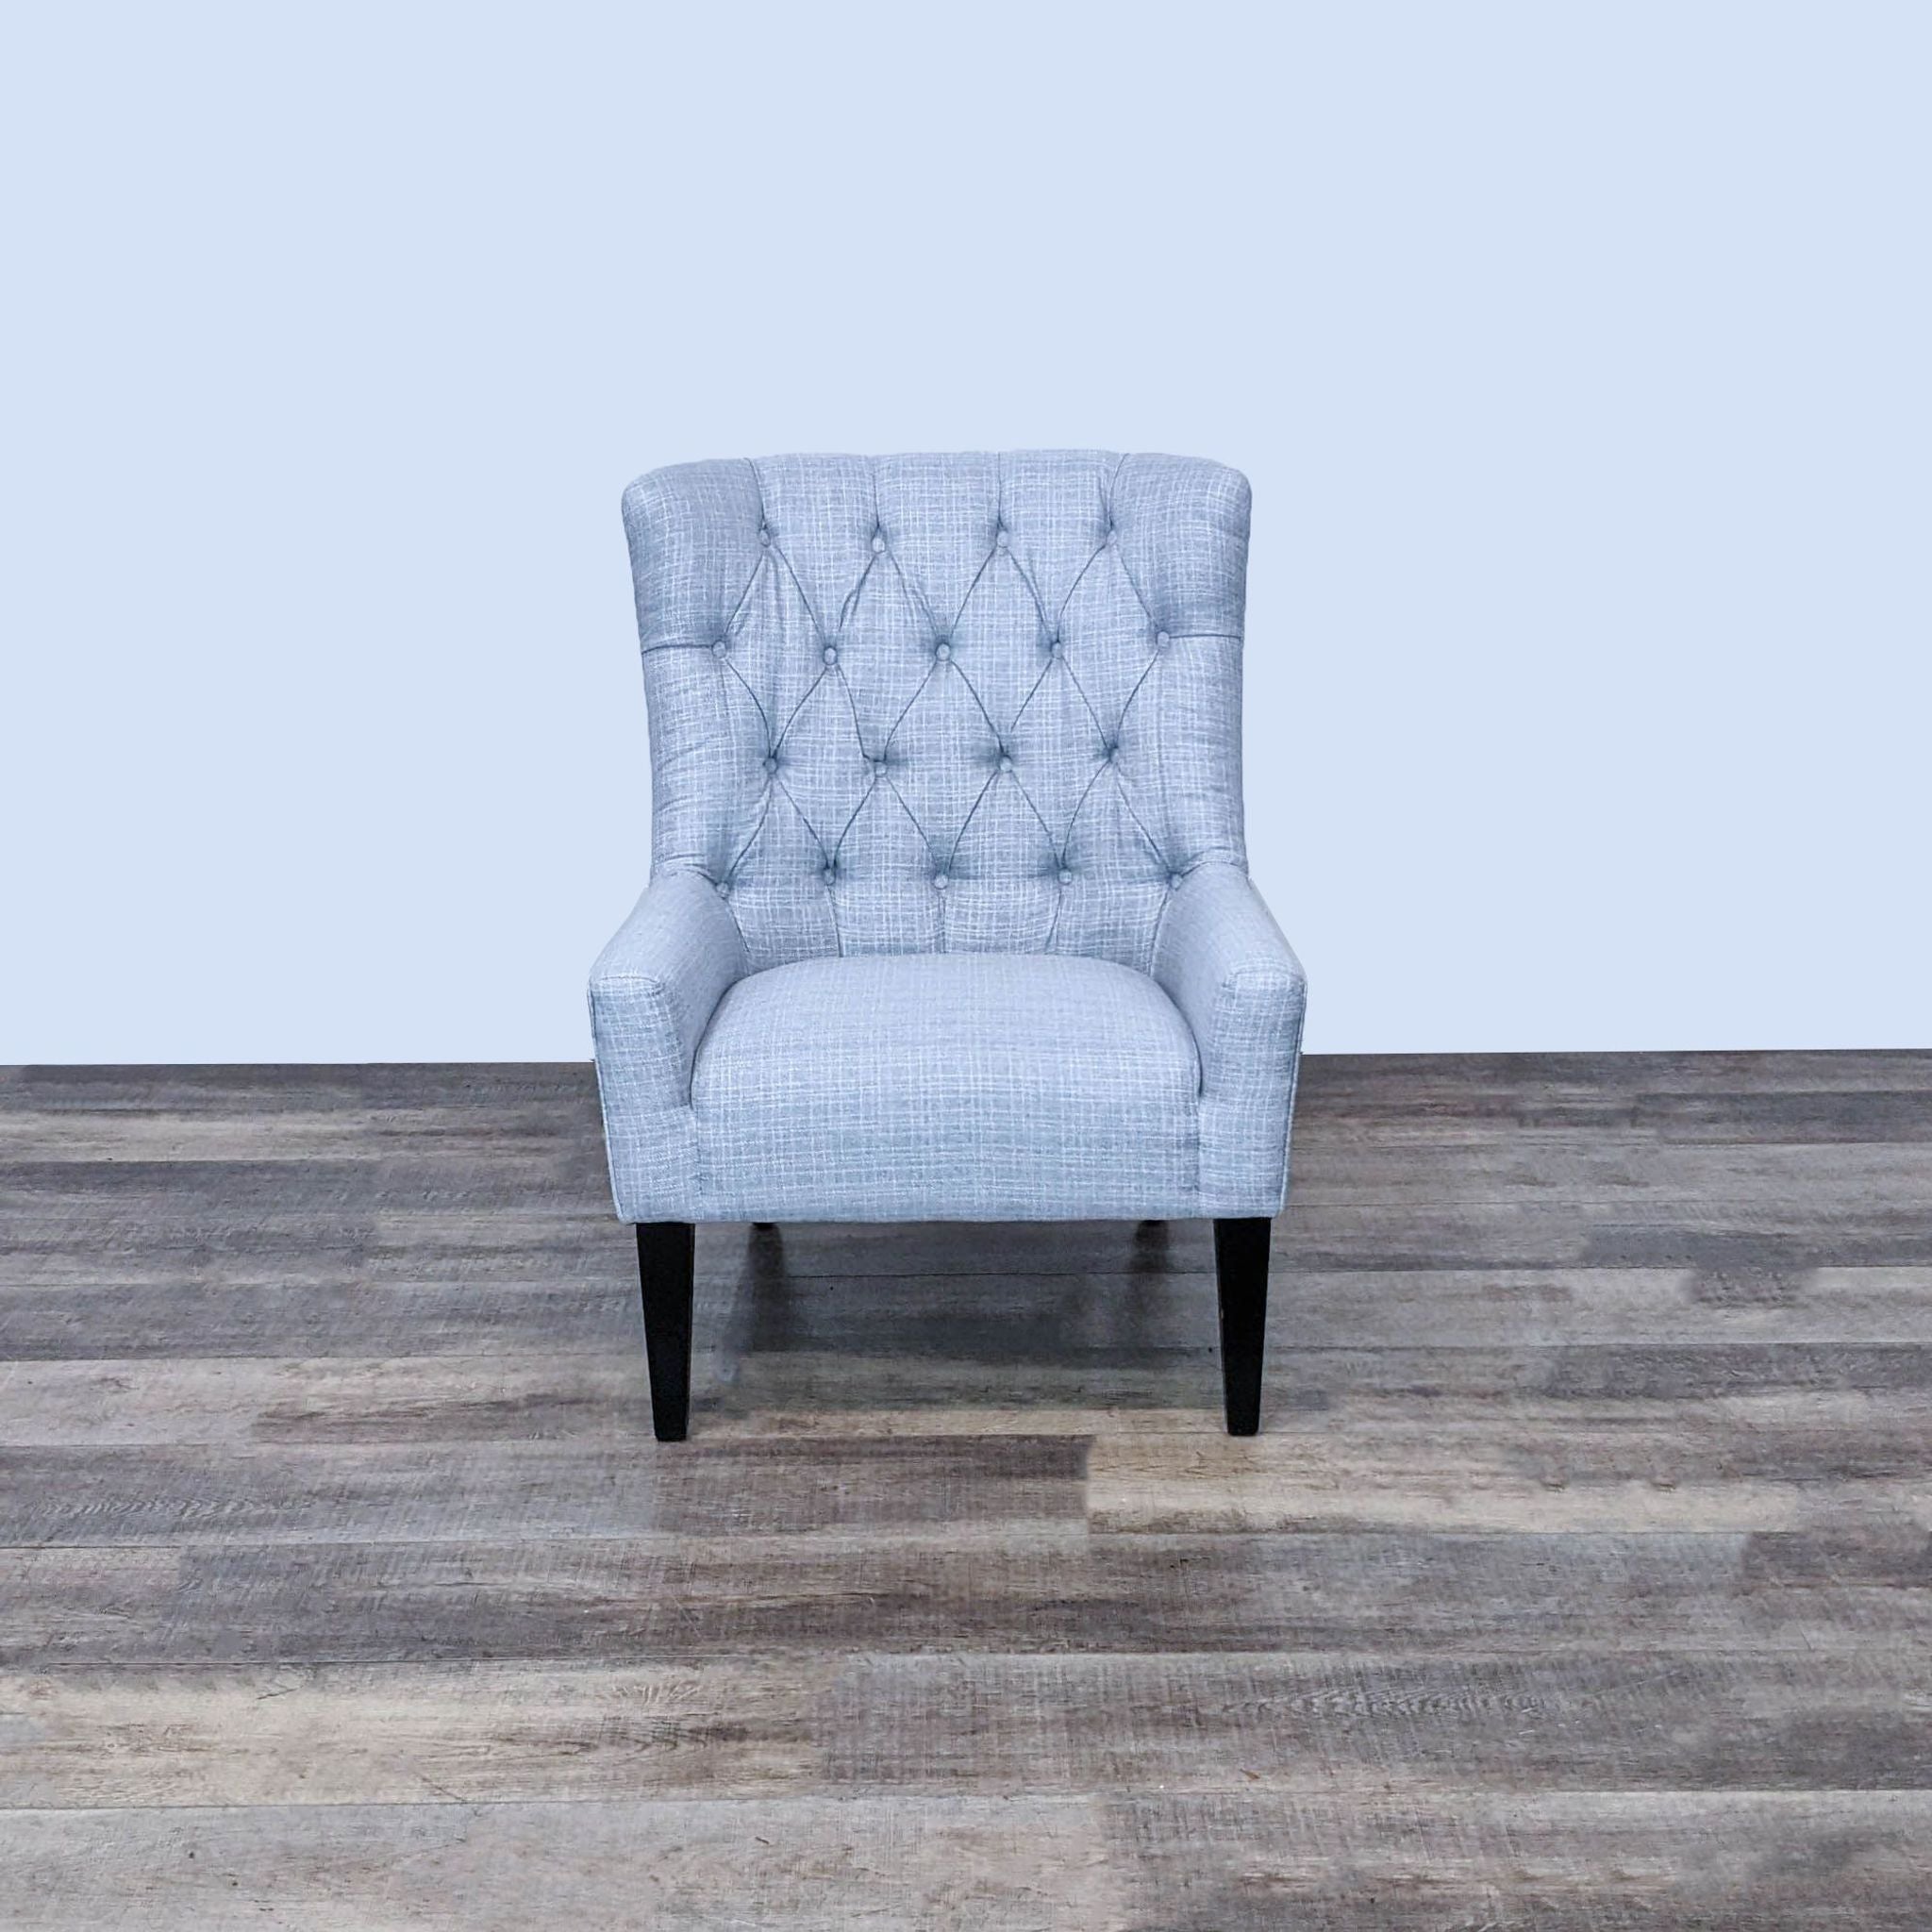 Pier 1 transitional wingback chair with button tufting, nailhead trim, and tapered ebony wood legs.